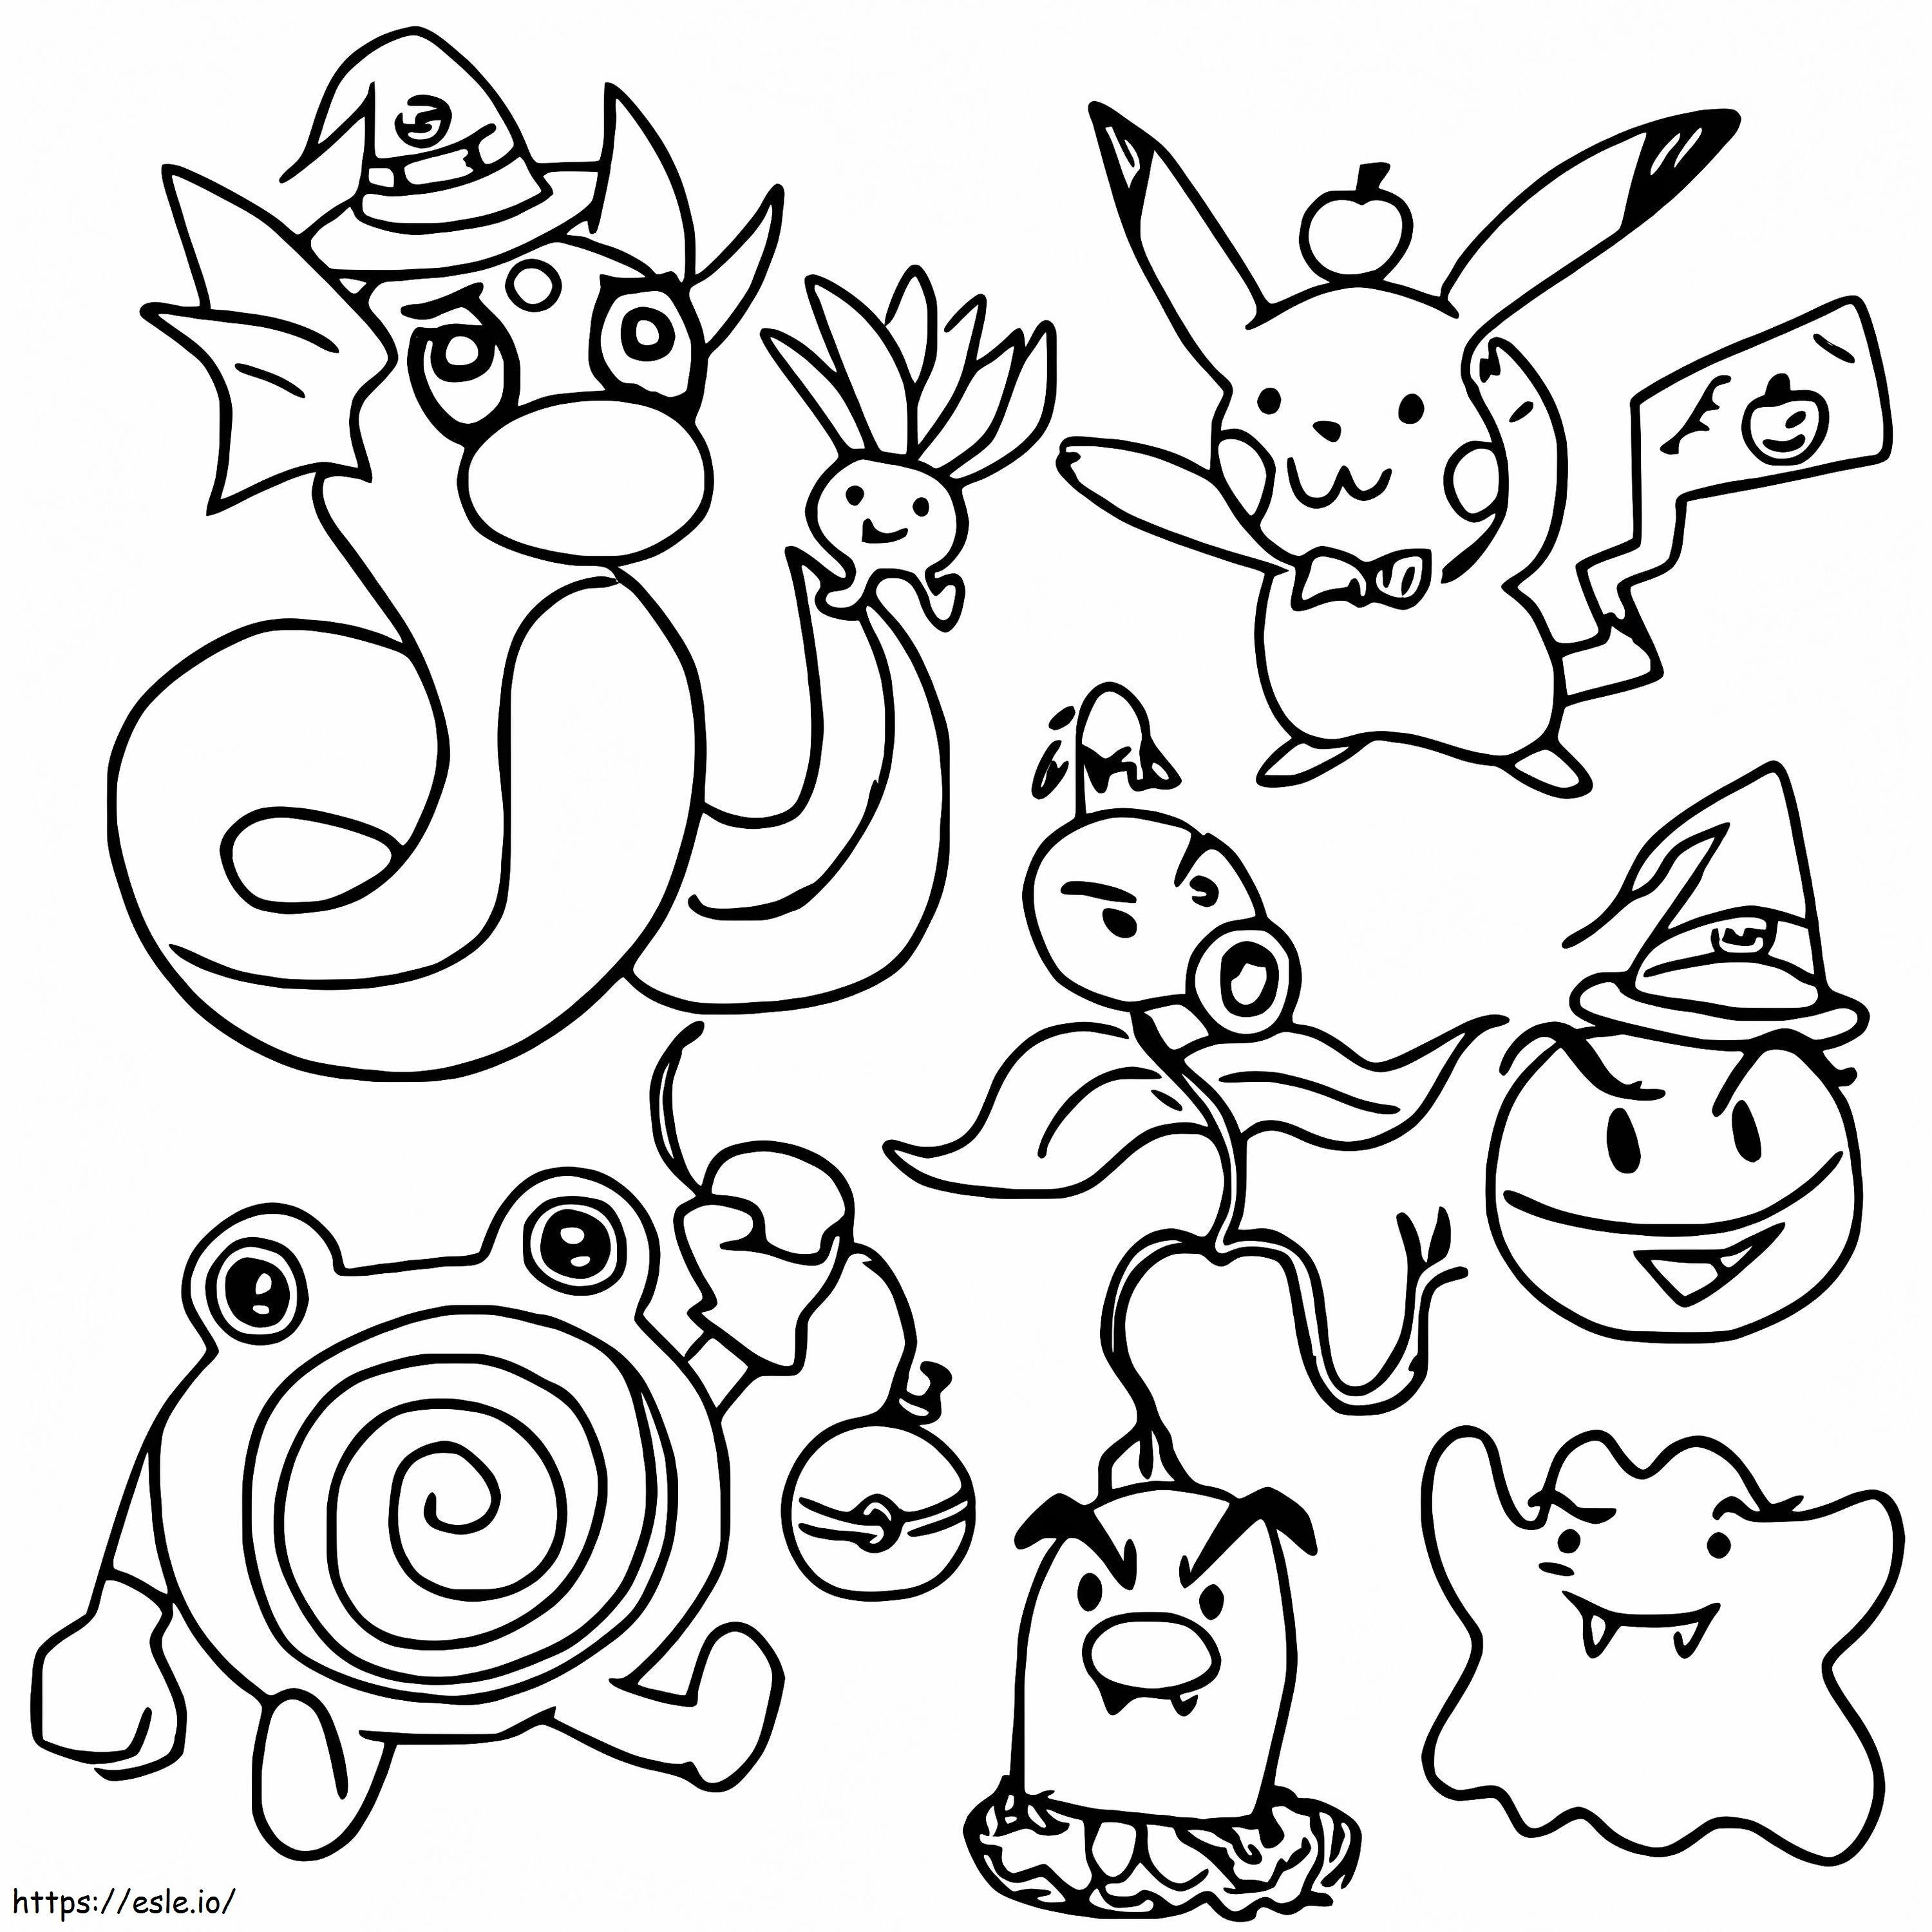 Cute Halloween Pokemon coloring page